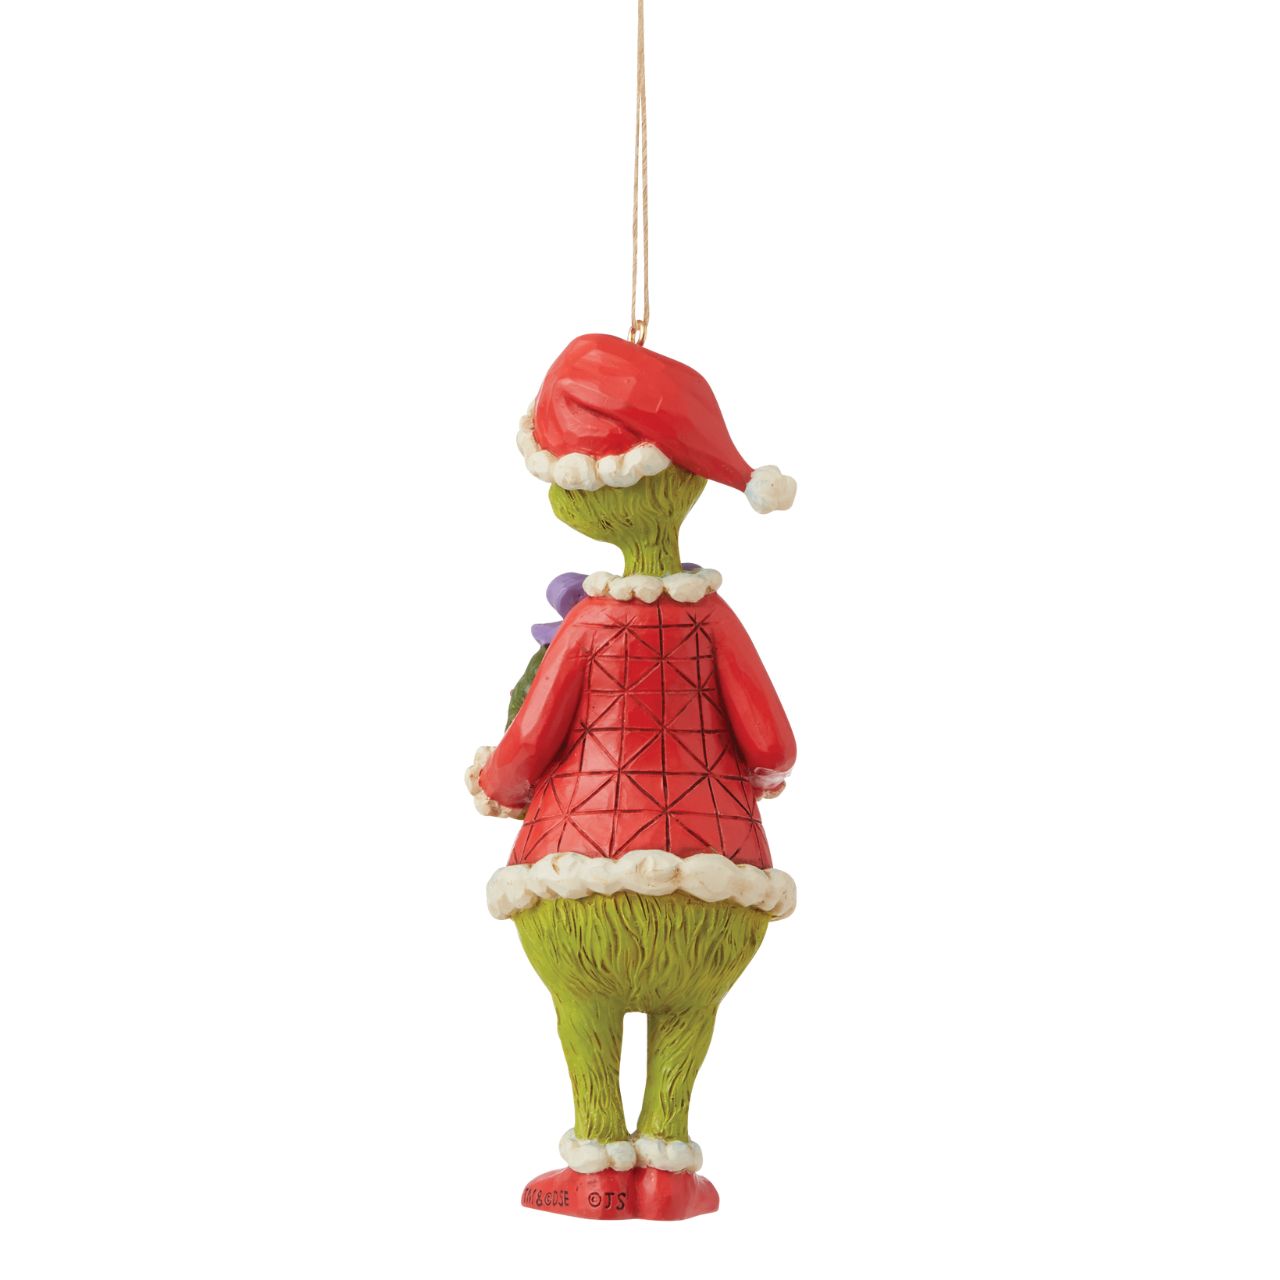 Grinch with Wreath Hanging Ornament  A perfect addition to any Christmas tree, this intricate Jim Shore bauble features The Grinch dressed as Santa. Holding a wreath between his conniving claws, his smile is closer to a sneer as he plots his next theft from your tree.